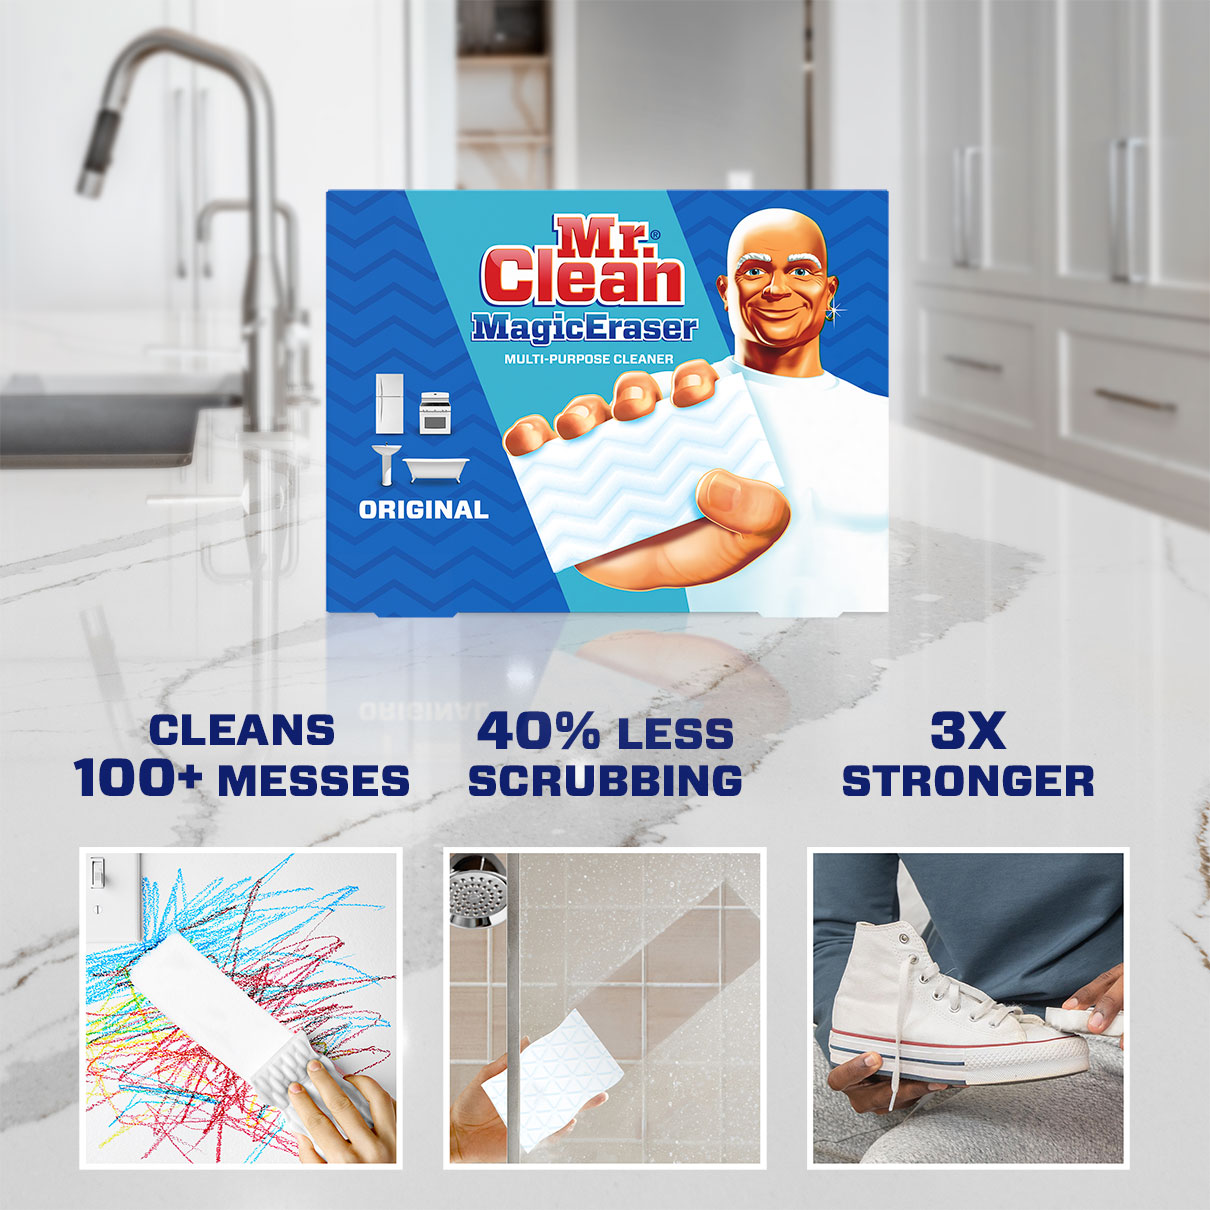 Magic Eraser Original For a Powerful Cleaning, Mr. Clean